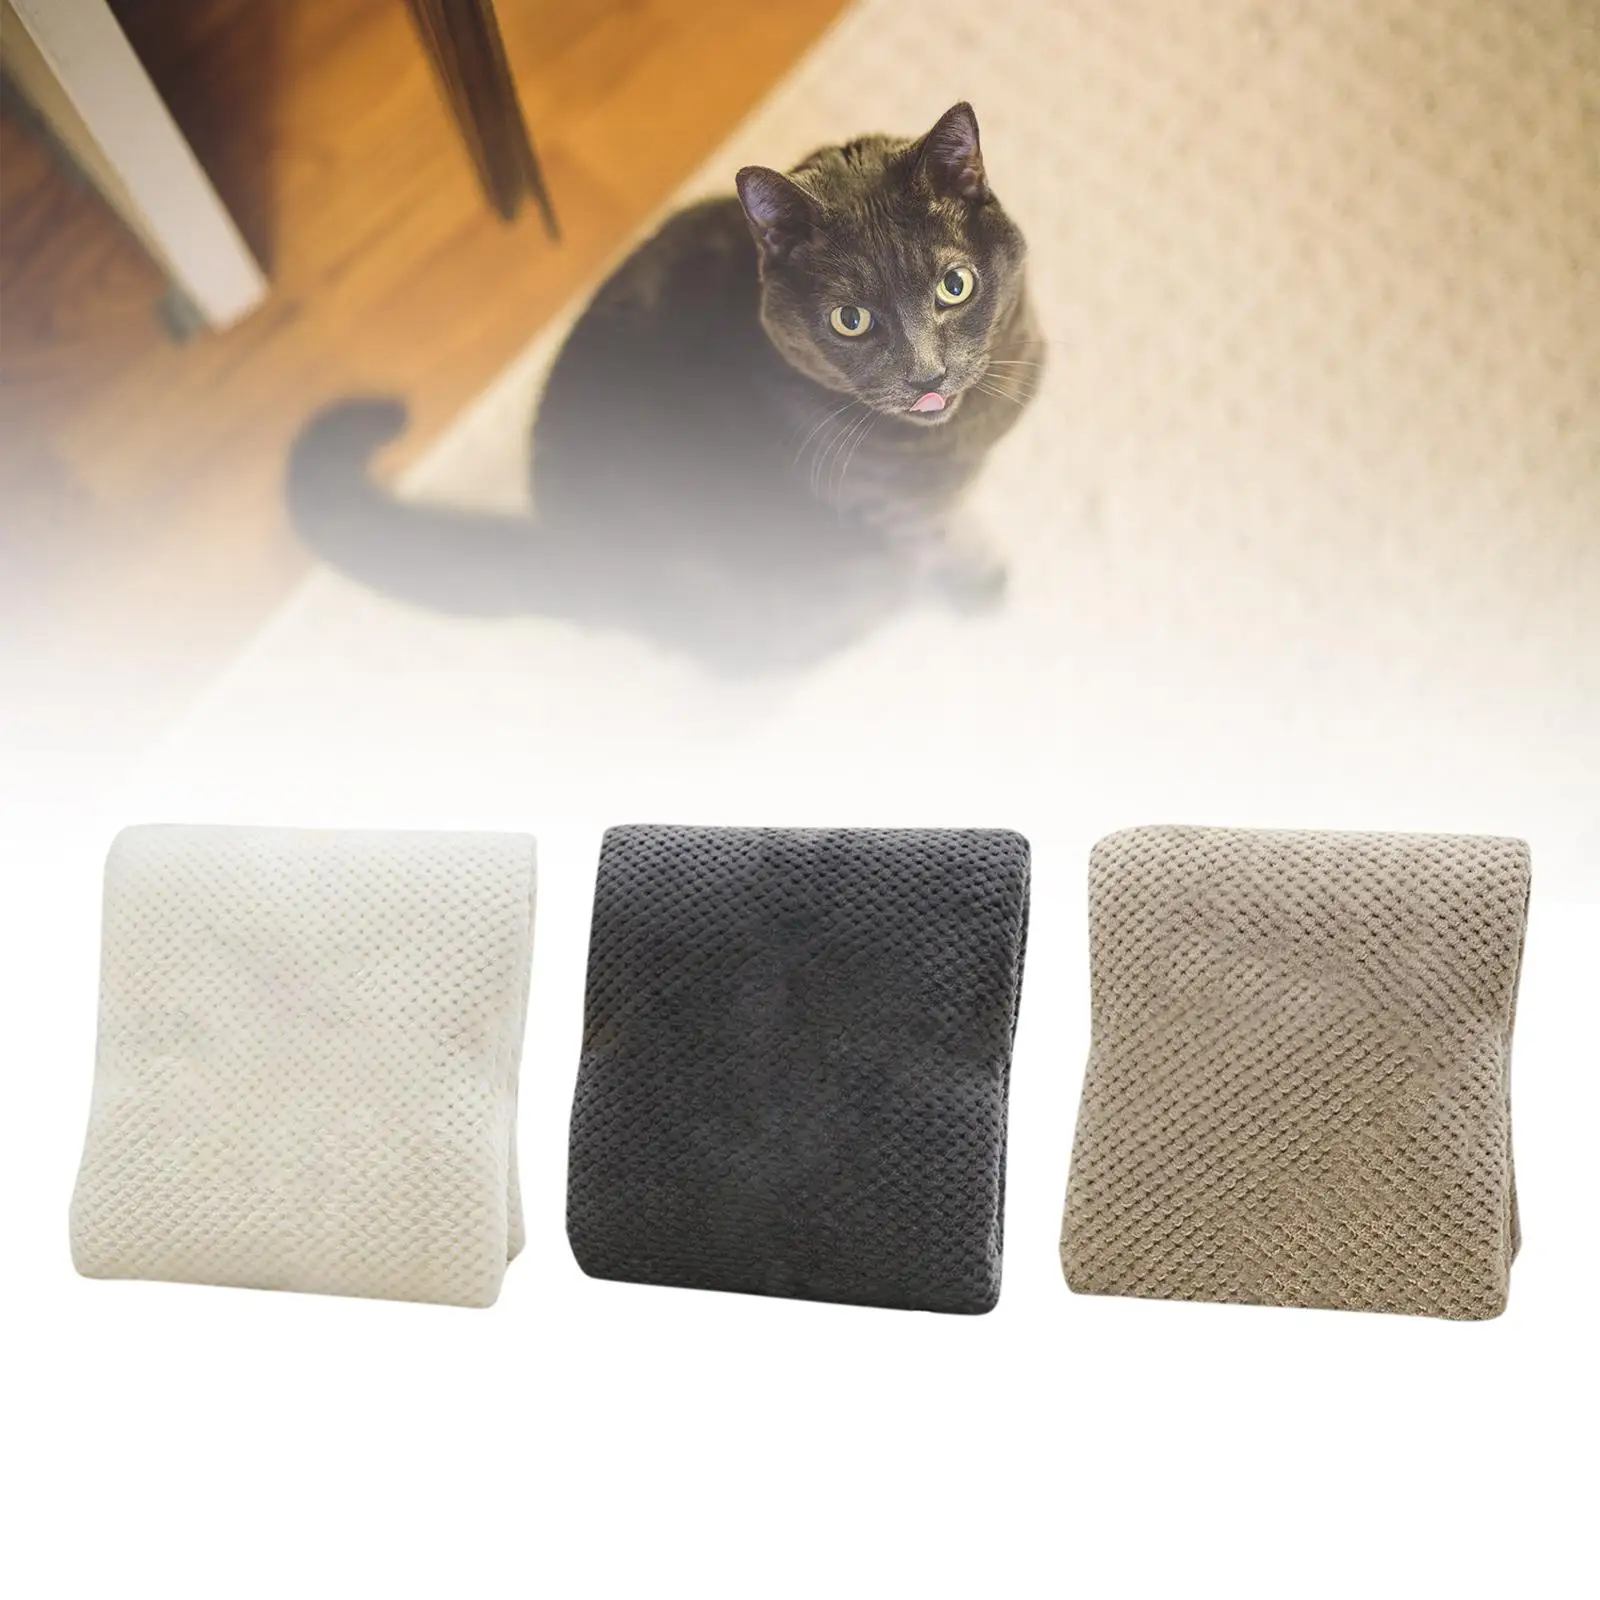 Comfortable Pet Throw Blanket Small Medium Large Dog Plush Supply Lightweight Doggy cushion Mat for cat Bed Crate Sofa